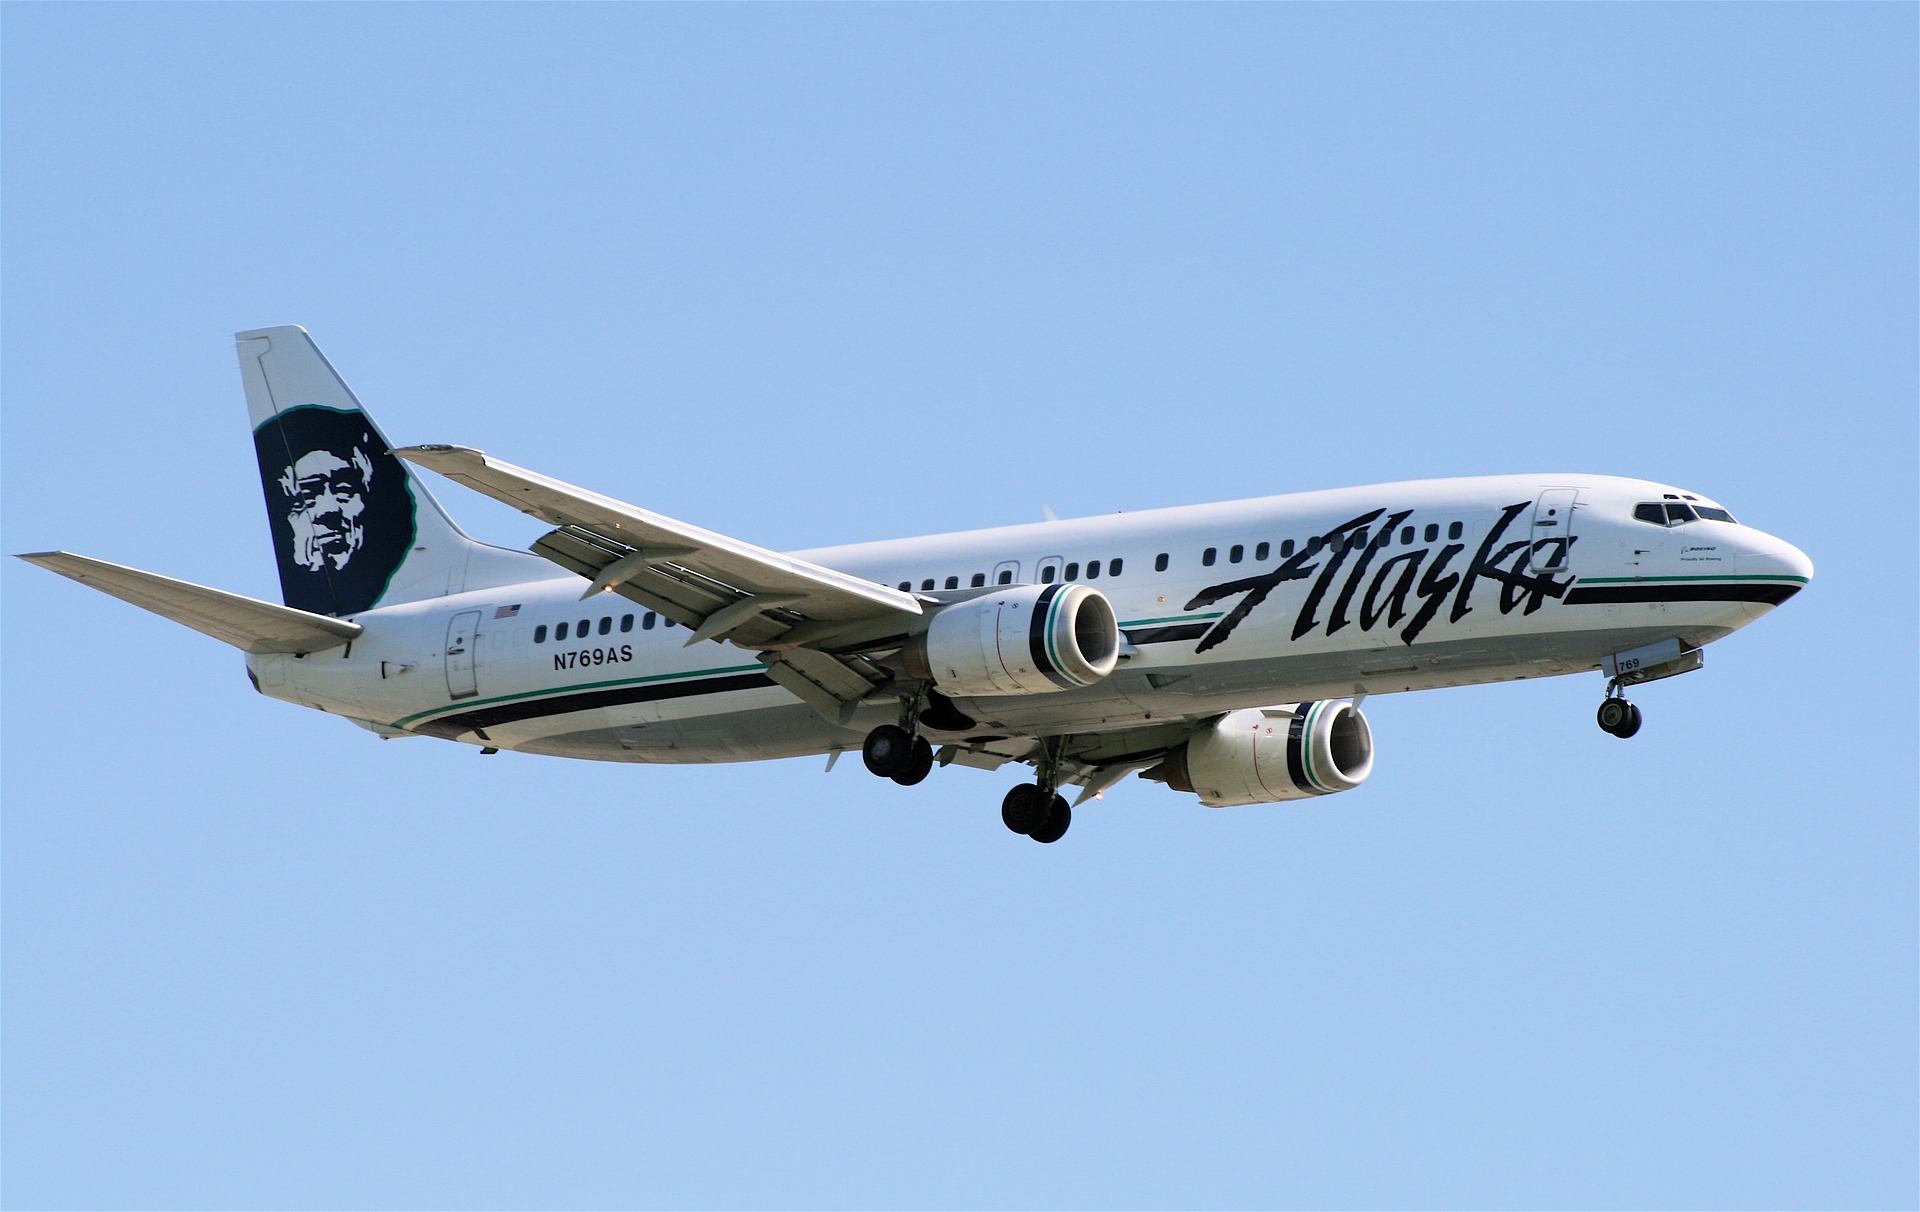 Flying with Alaska Airlines? Here's what you need to know about their policy so that you can bring your portable oxygen concentrator on your next flight.